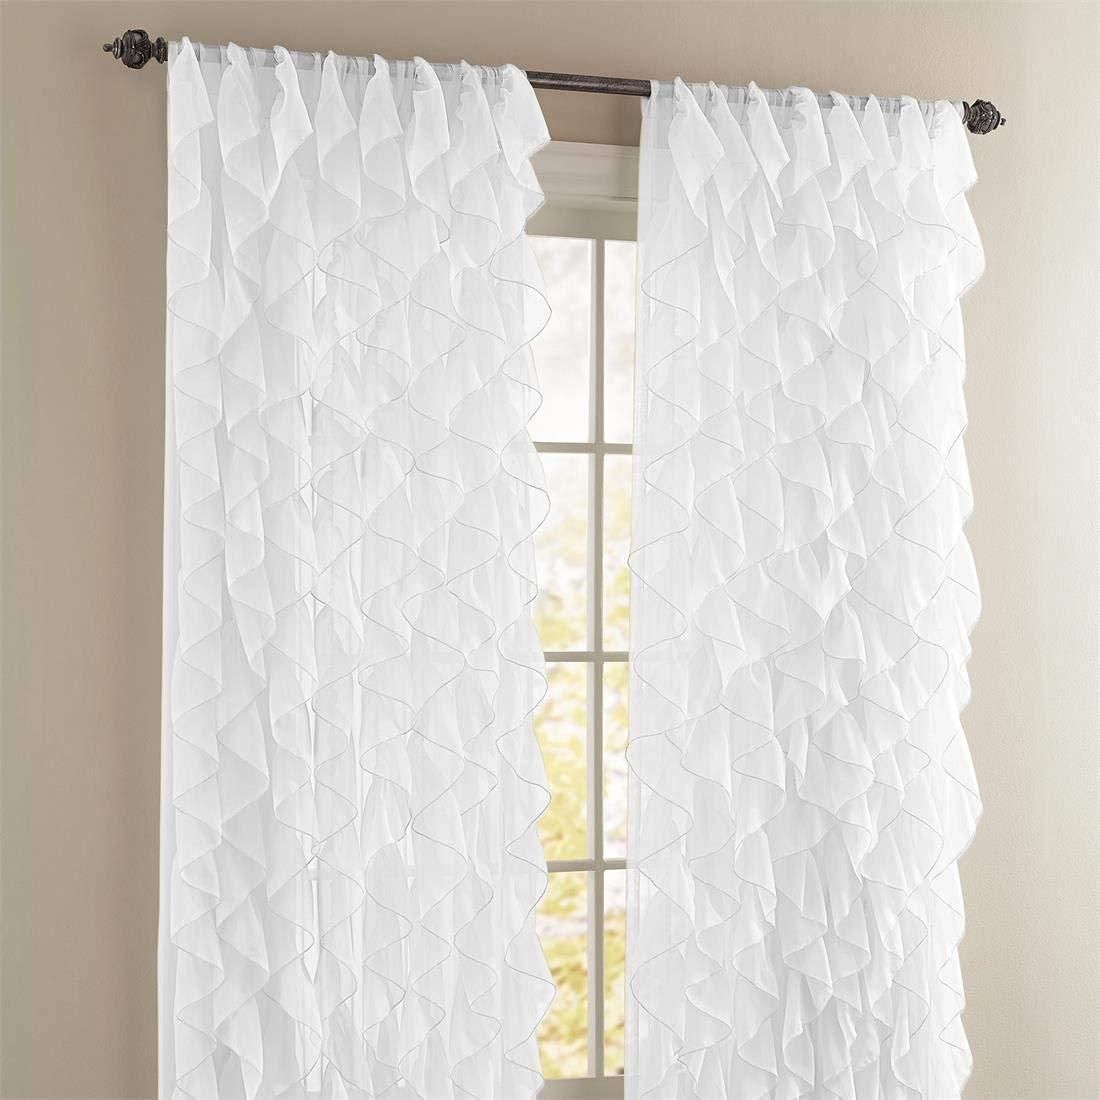 Cascade Ruffled Curtain Panel, 50" Wide84" Long, White, Lorraine Home In Vertical Ruffled Waterfall Valances And Curtain Tiers (Photo 15 of 20)